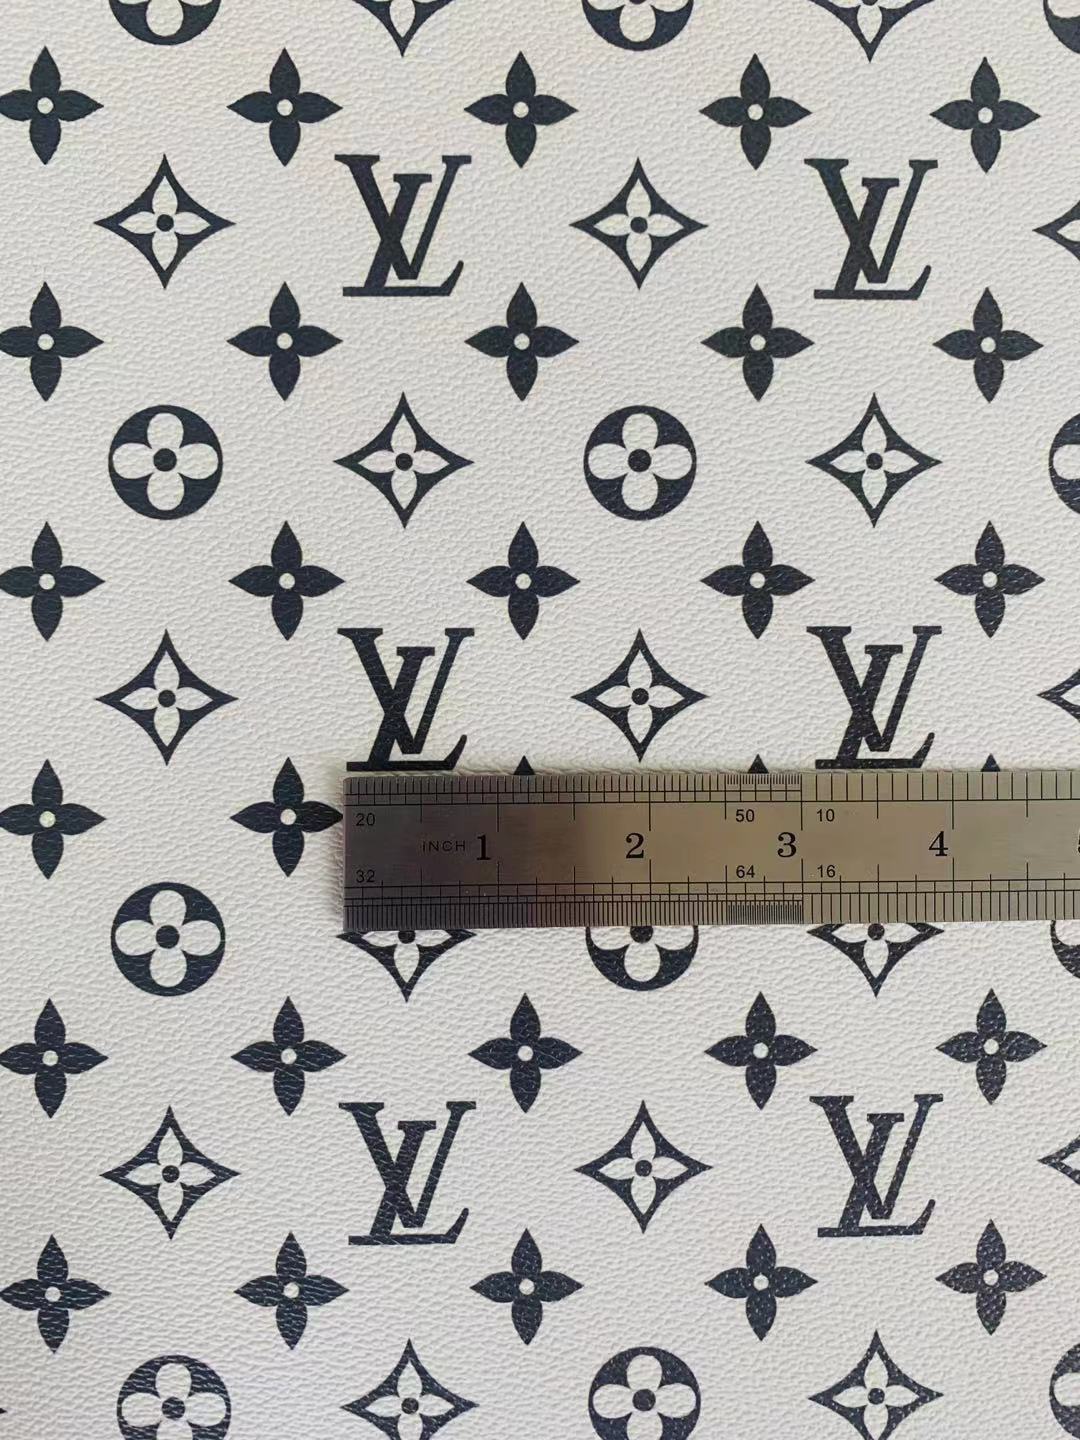 Fashion LV Handmade Black With White Leather Fabric Material for Bags and Shoes By Yards